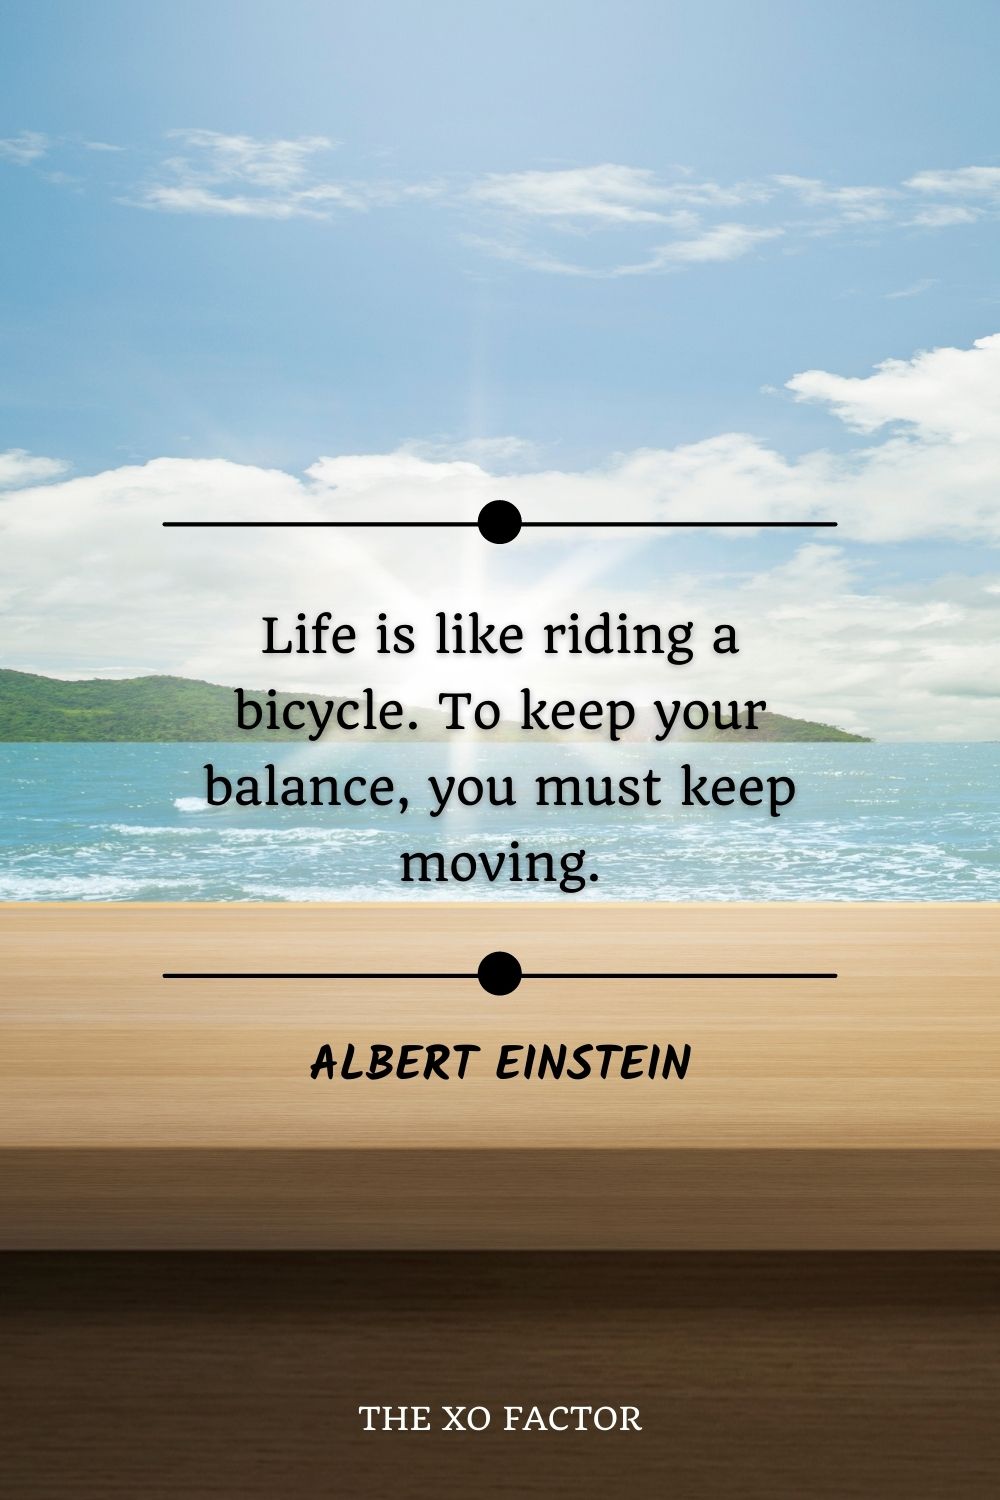 “Life is like riding a bicycle. To keep your balance, you must keep moving.”― Albert Einstein